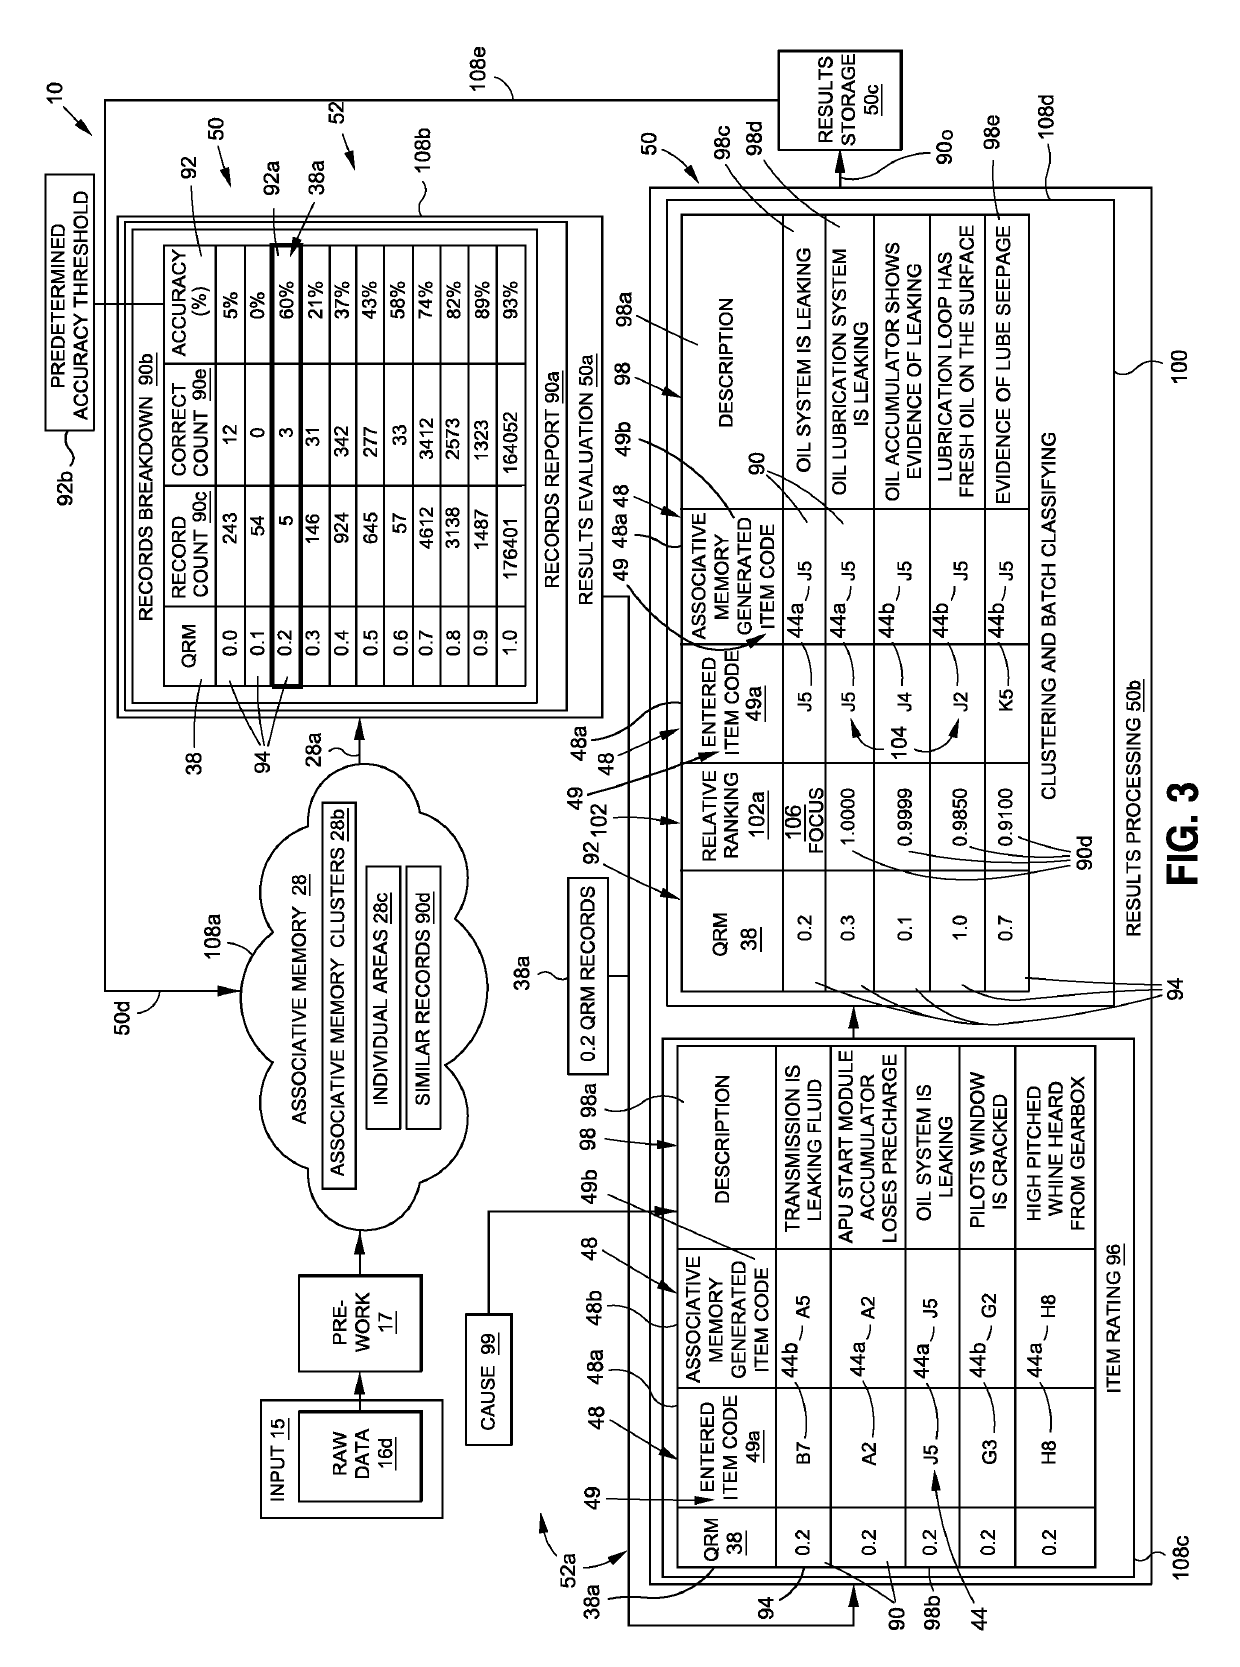 Data driven classification and troubleshooting system and method using associative memory and a machine learning algorithm to improve the accuracy and performance of the associative memory